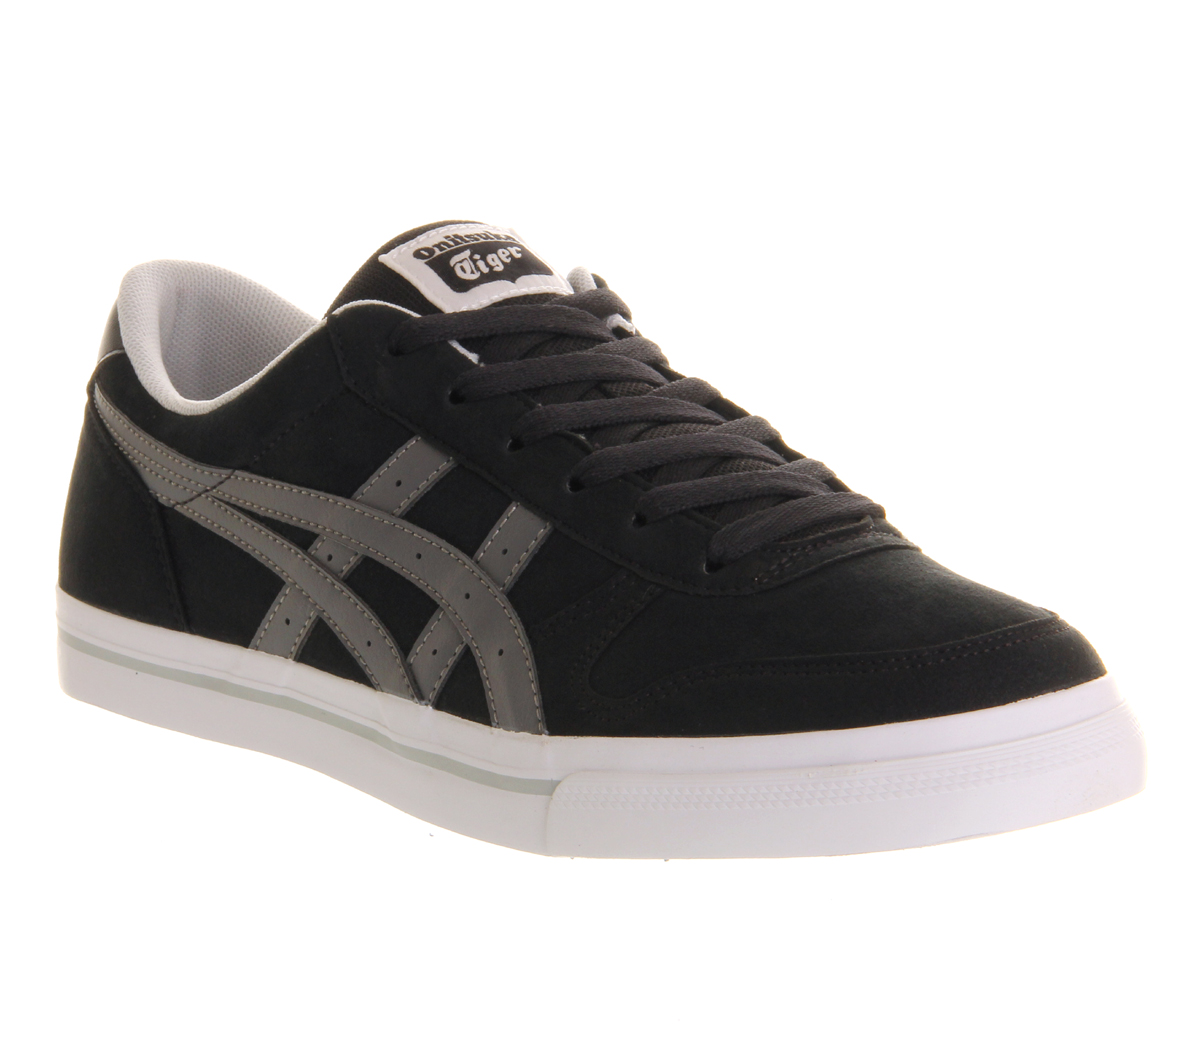 asics onitsuka tiger aaron, considerable deal UP TO 70% OFF -  statehouse.gov.sl